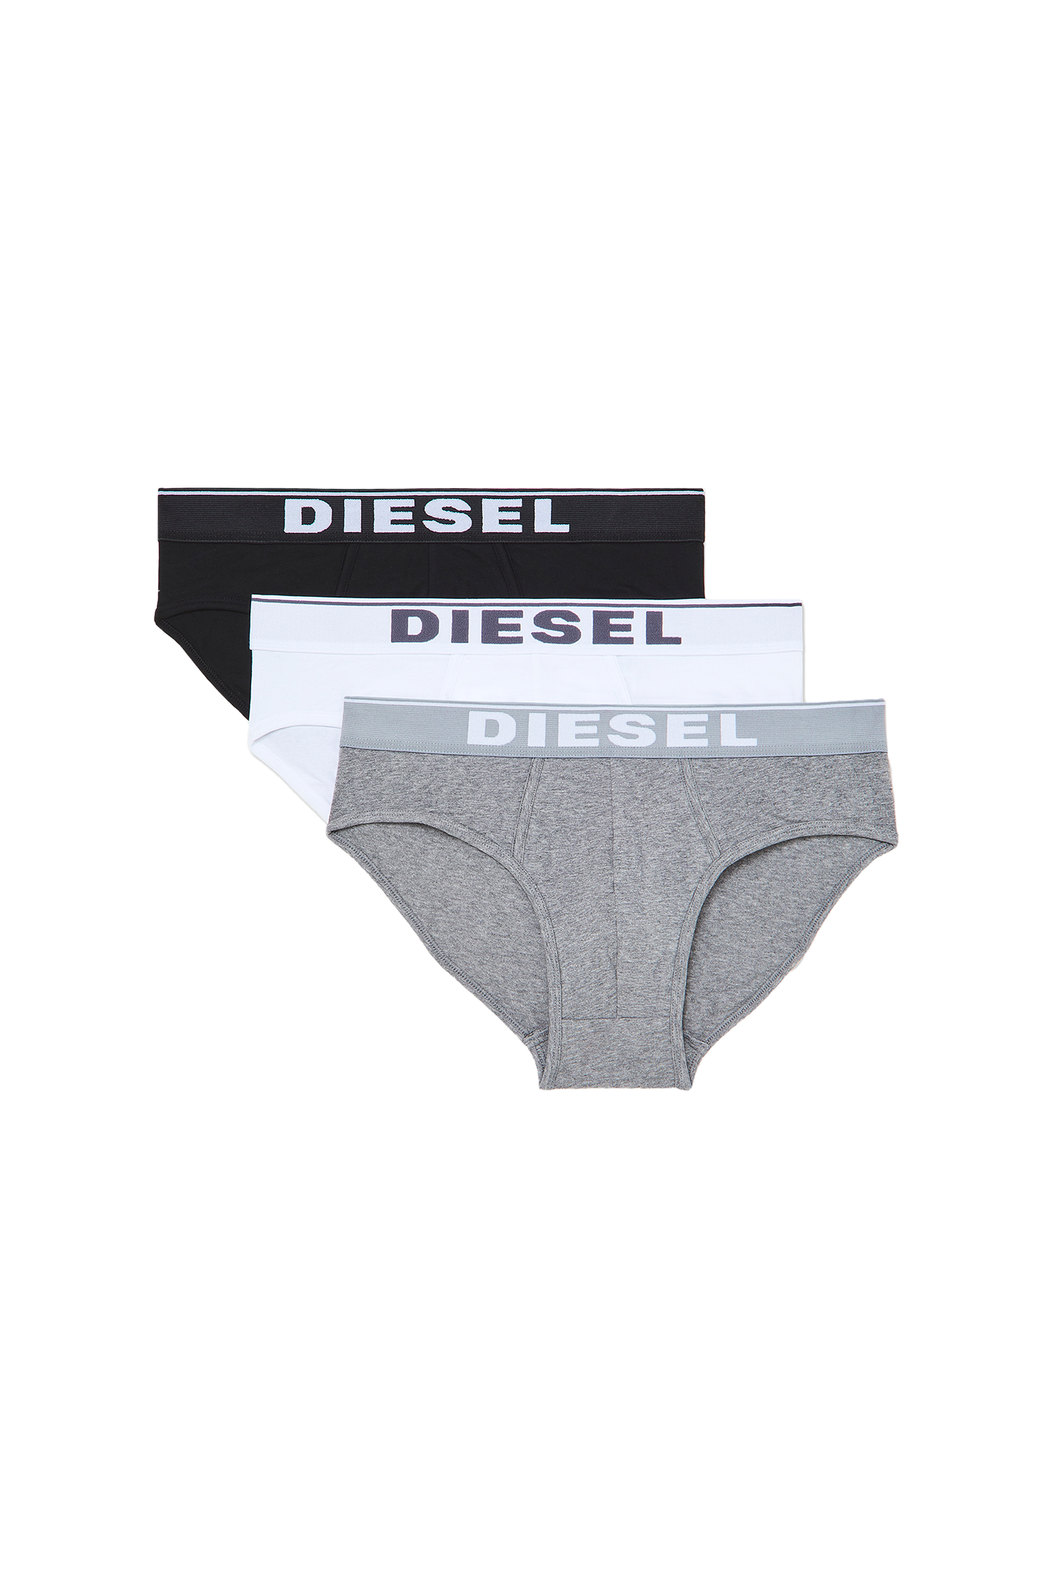 Briefs With Tonal Waistaband - 3 Pack